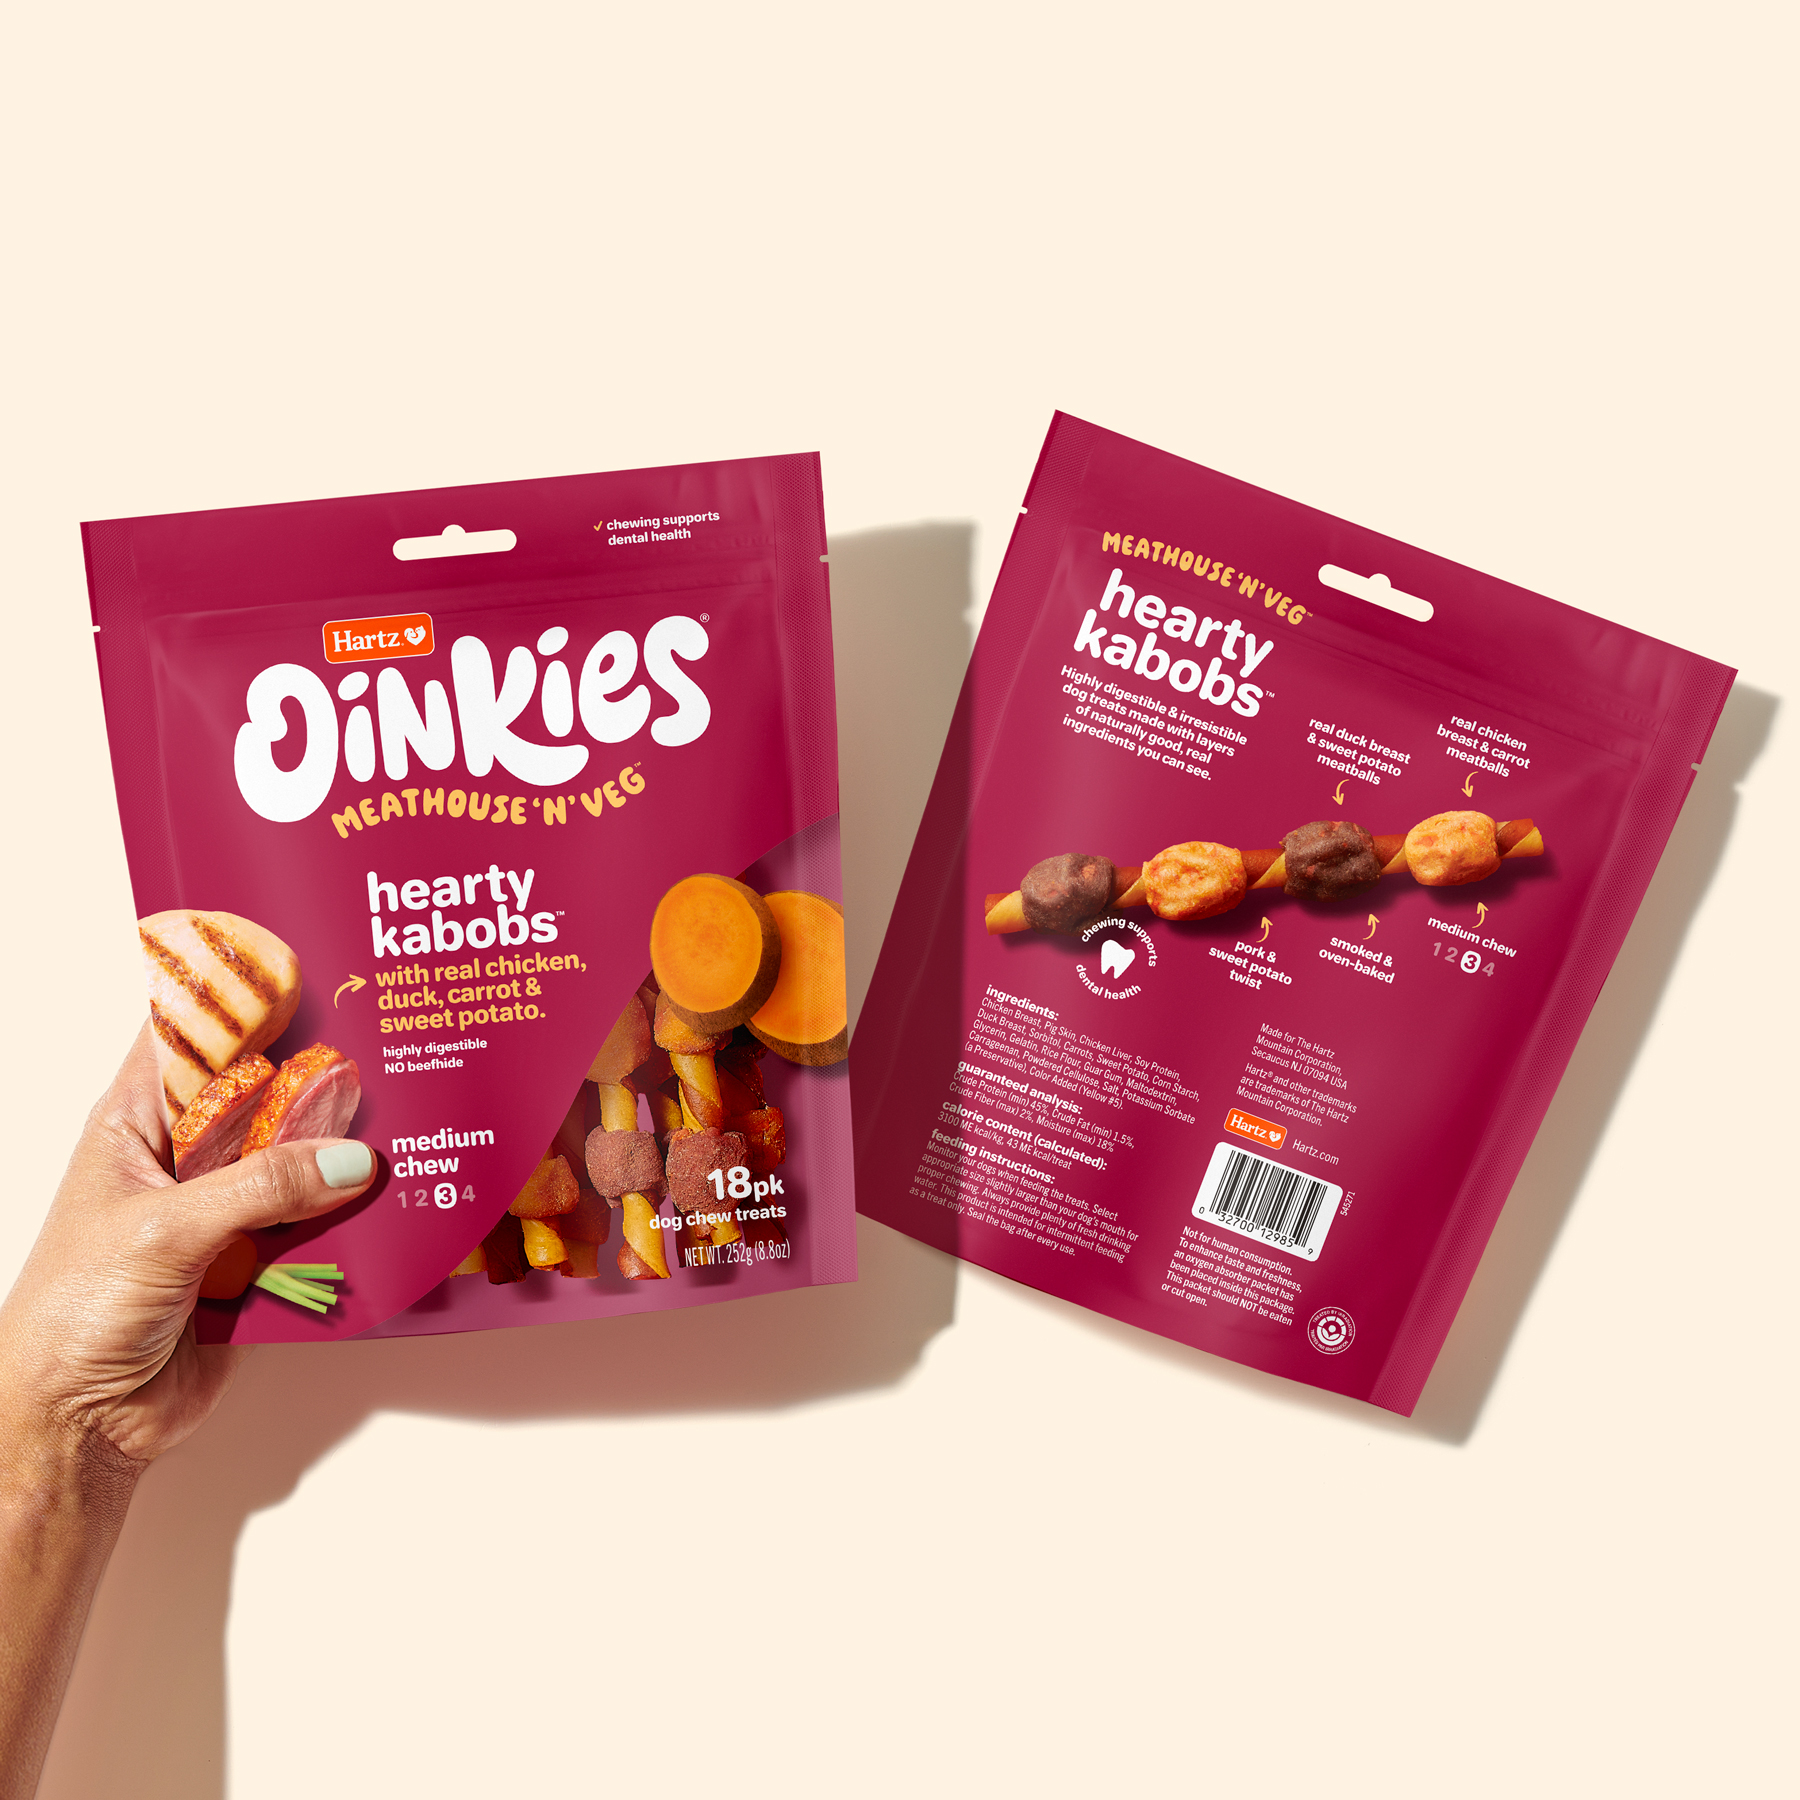 Oinkies Meathouse & Veg Hearty Kabobs pet packaging photography redesign.